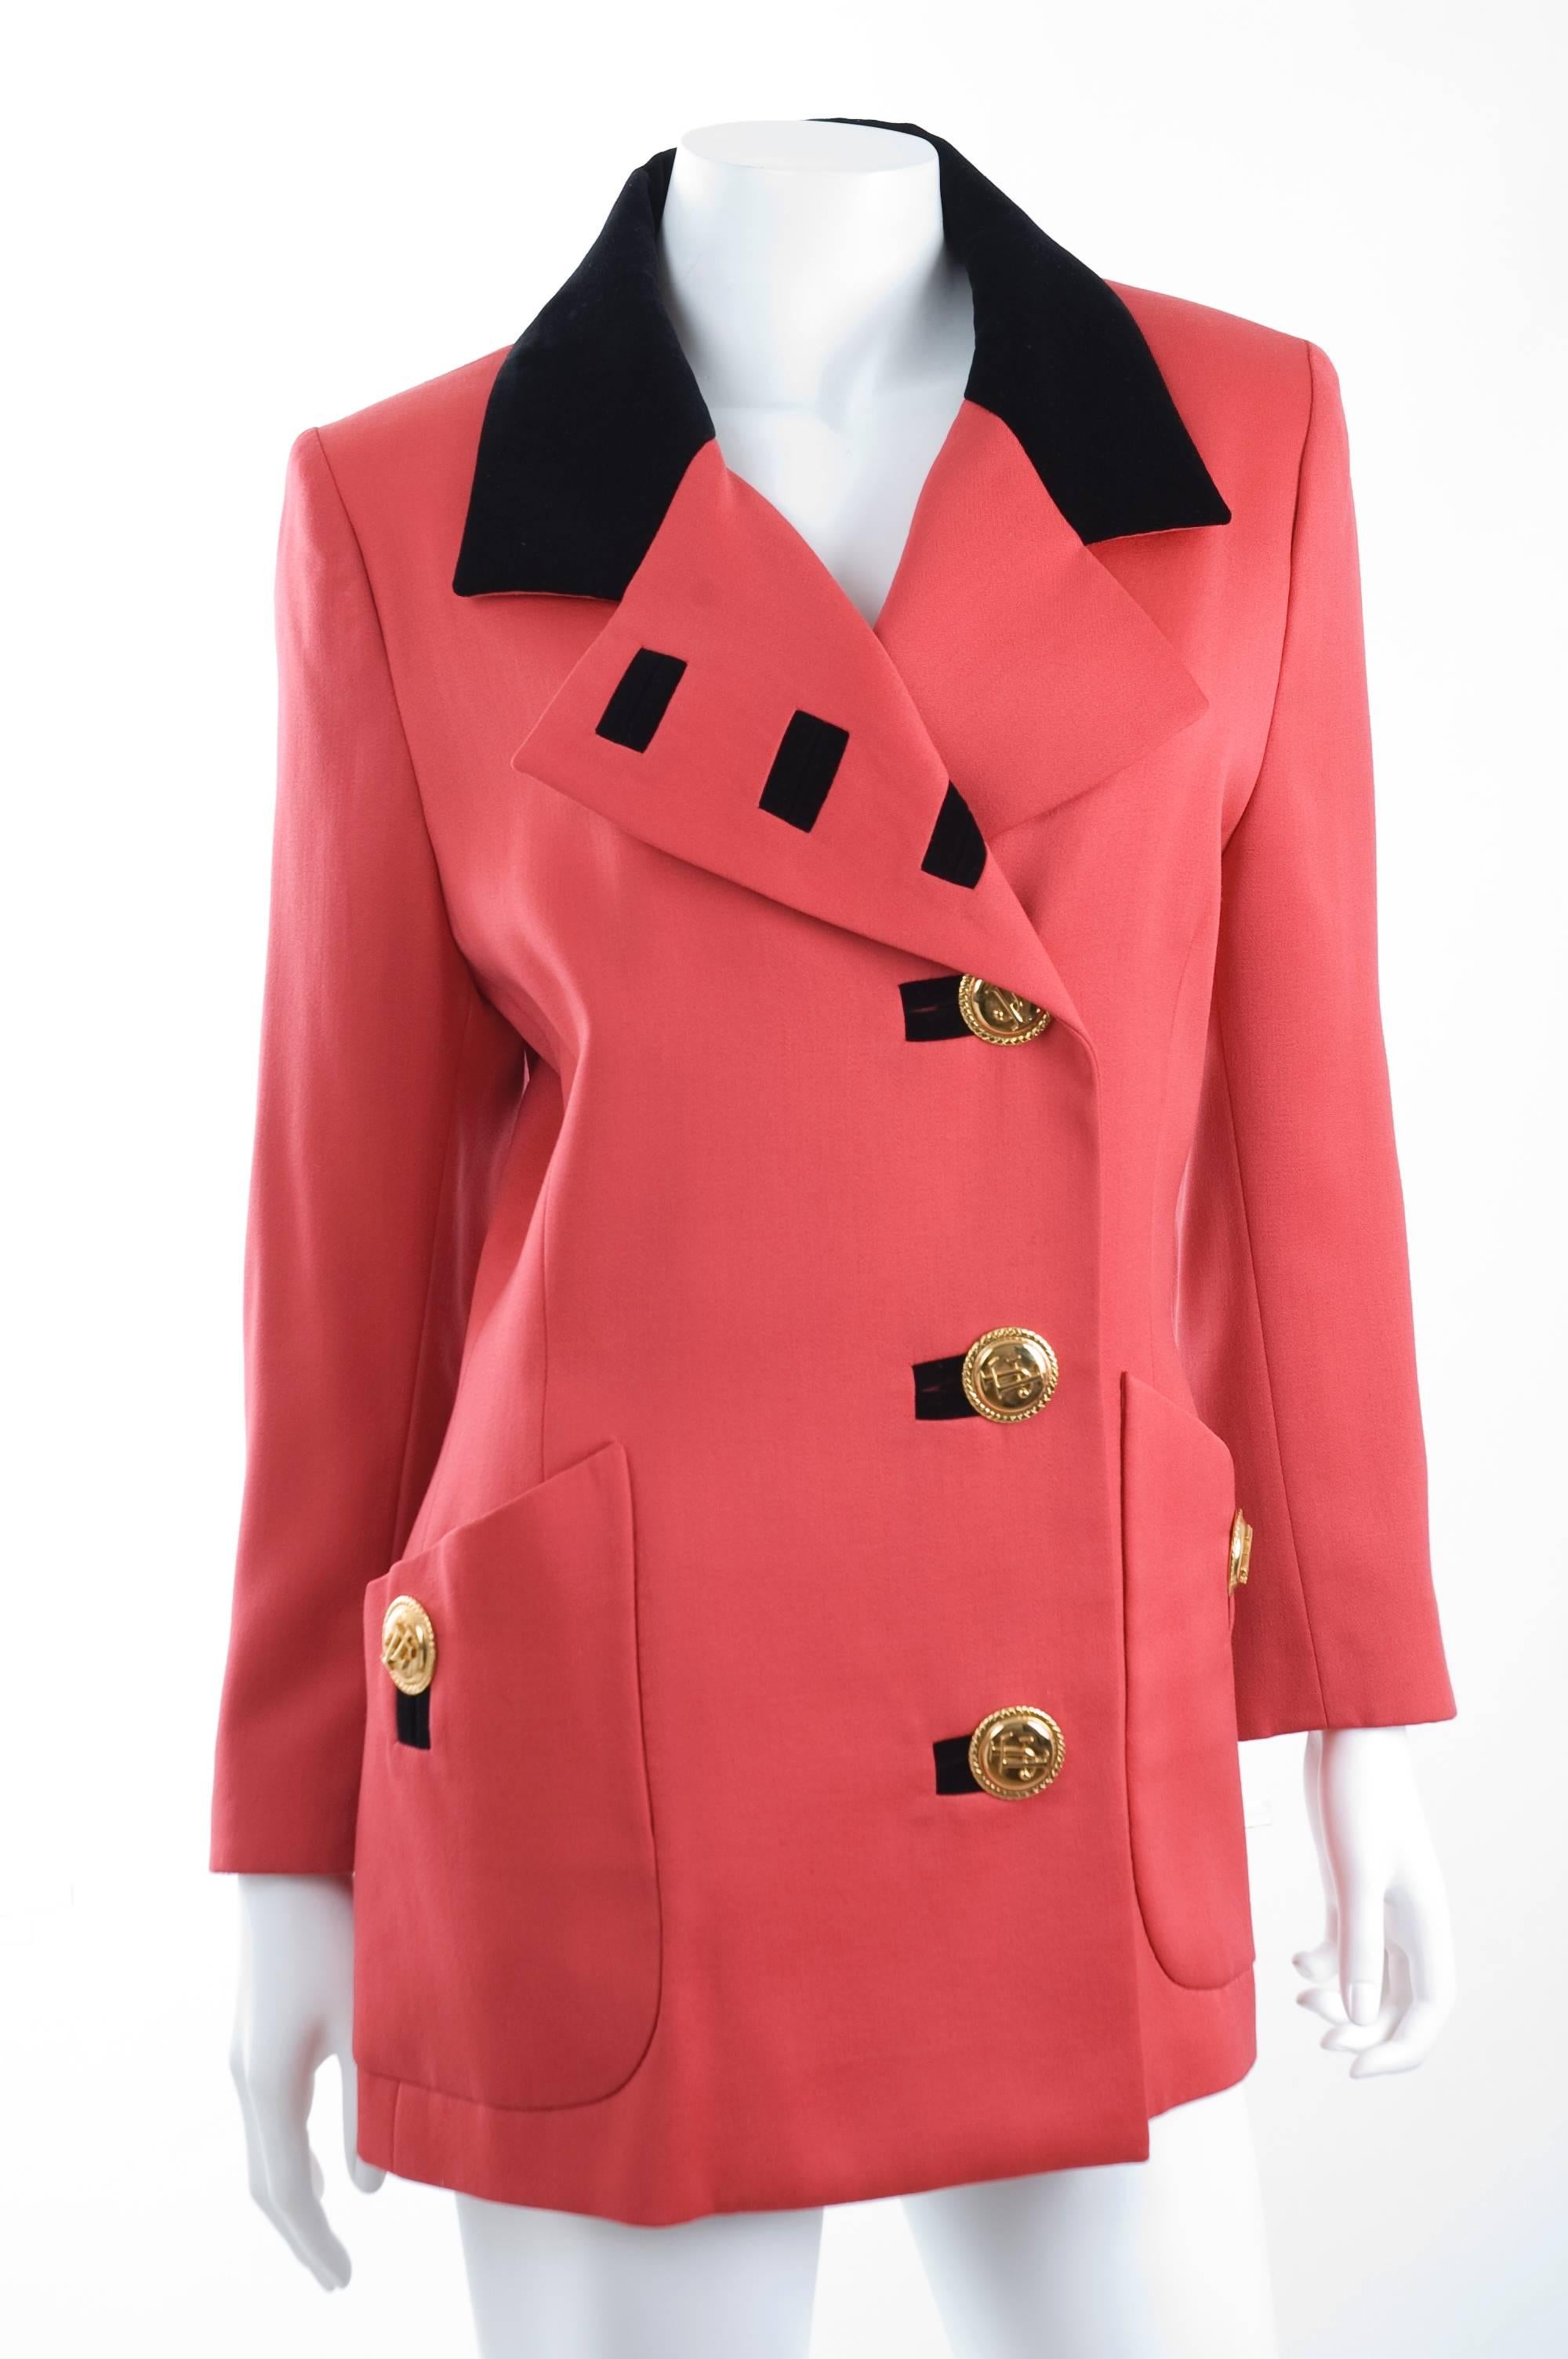 Jaques Fath Jacket in Lipstick Red and Black Velvet For Sale 1